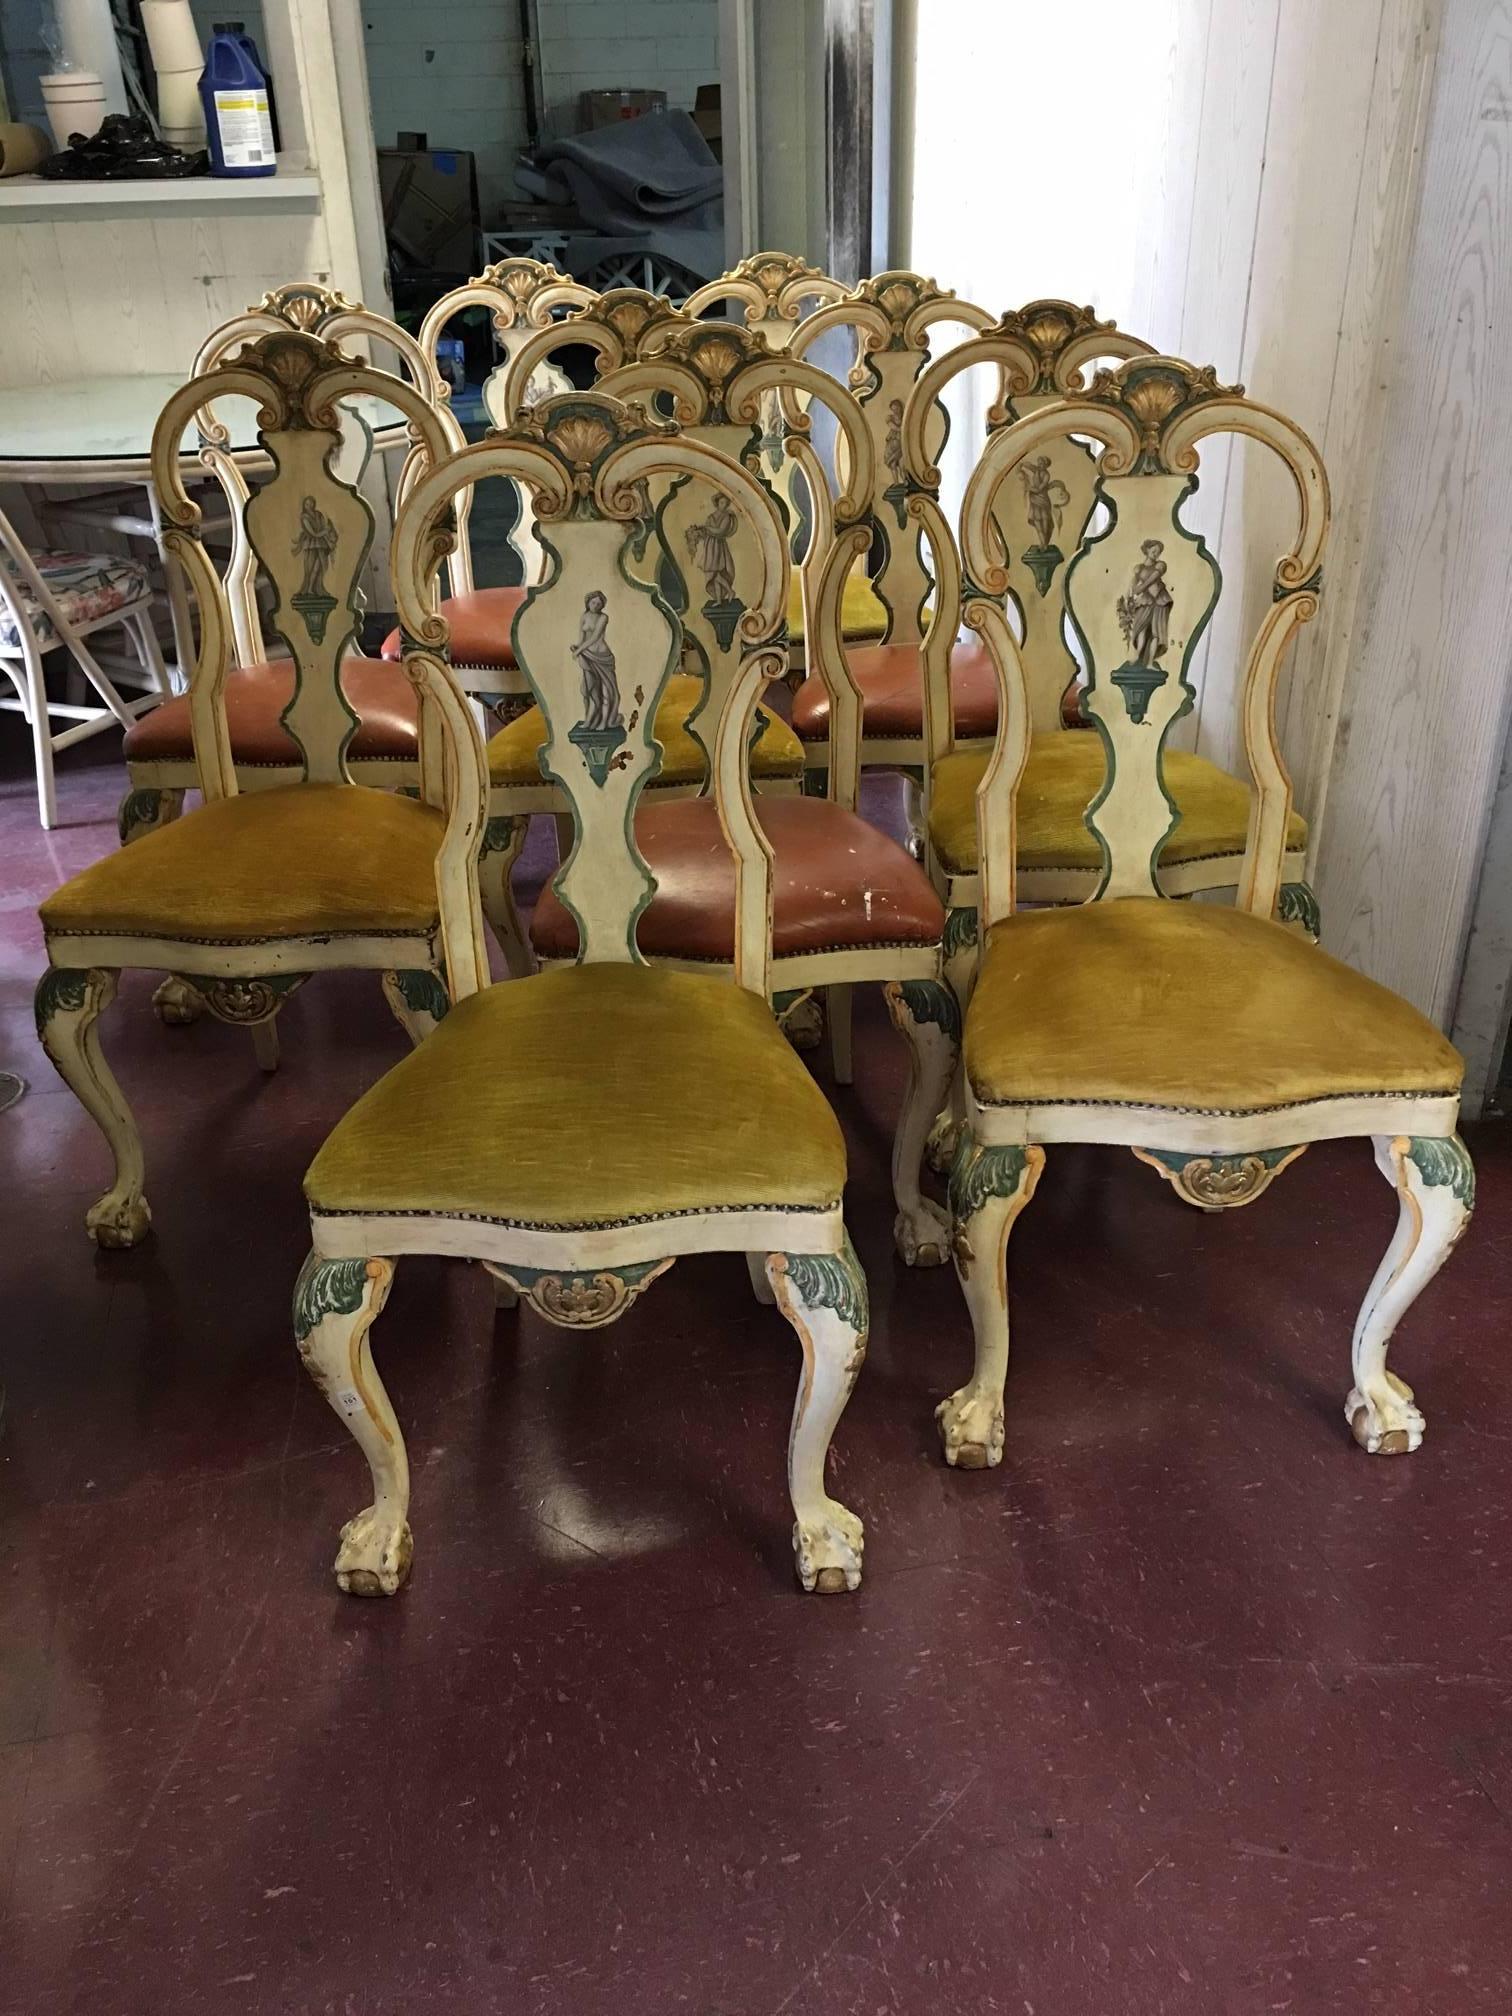 Painted chairs with maidens and ball and claw feet.